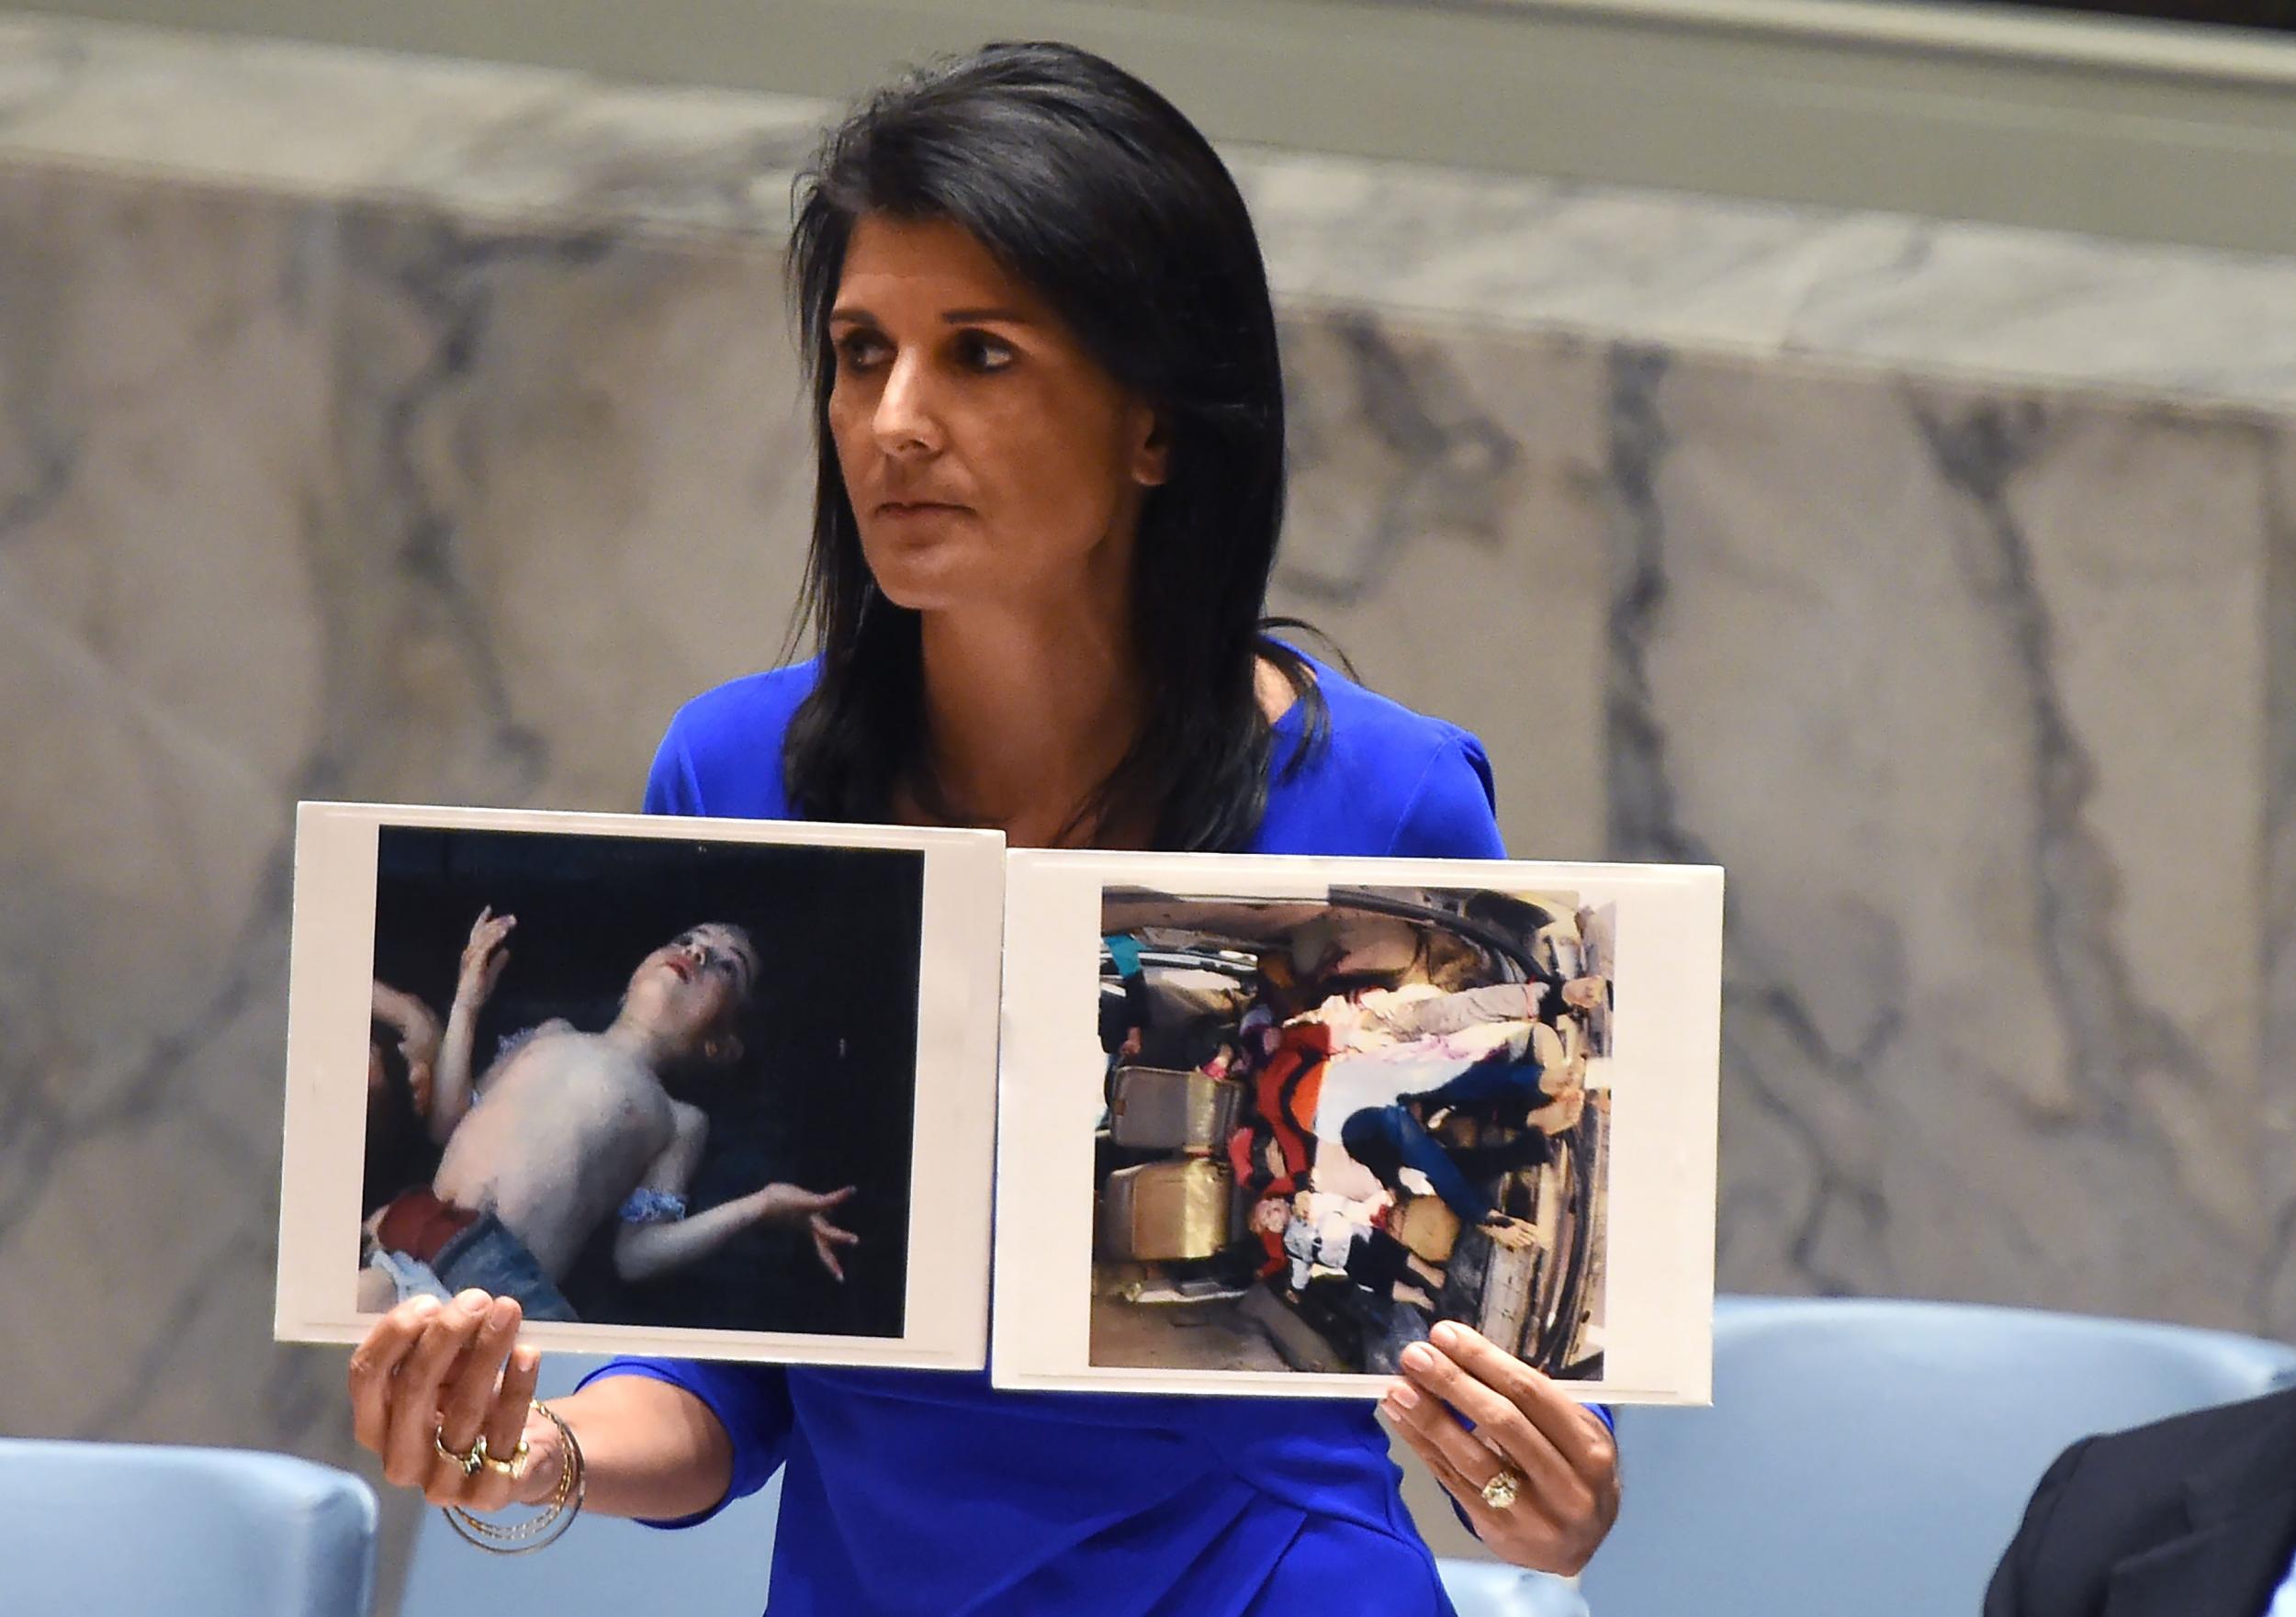 Nikki Haley, US ambassador to the UN, with photos of victims as she speaks during an emergency session at the UN on Wednesday